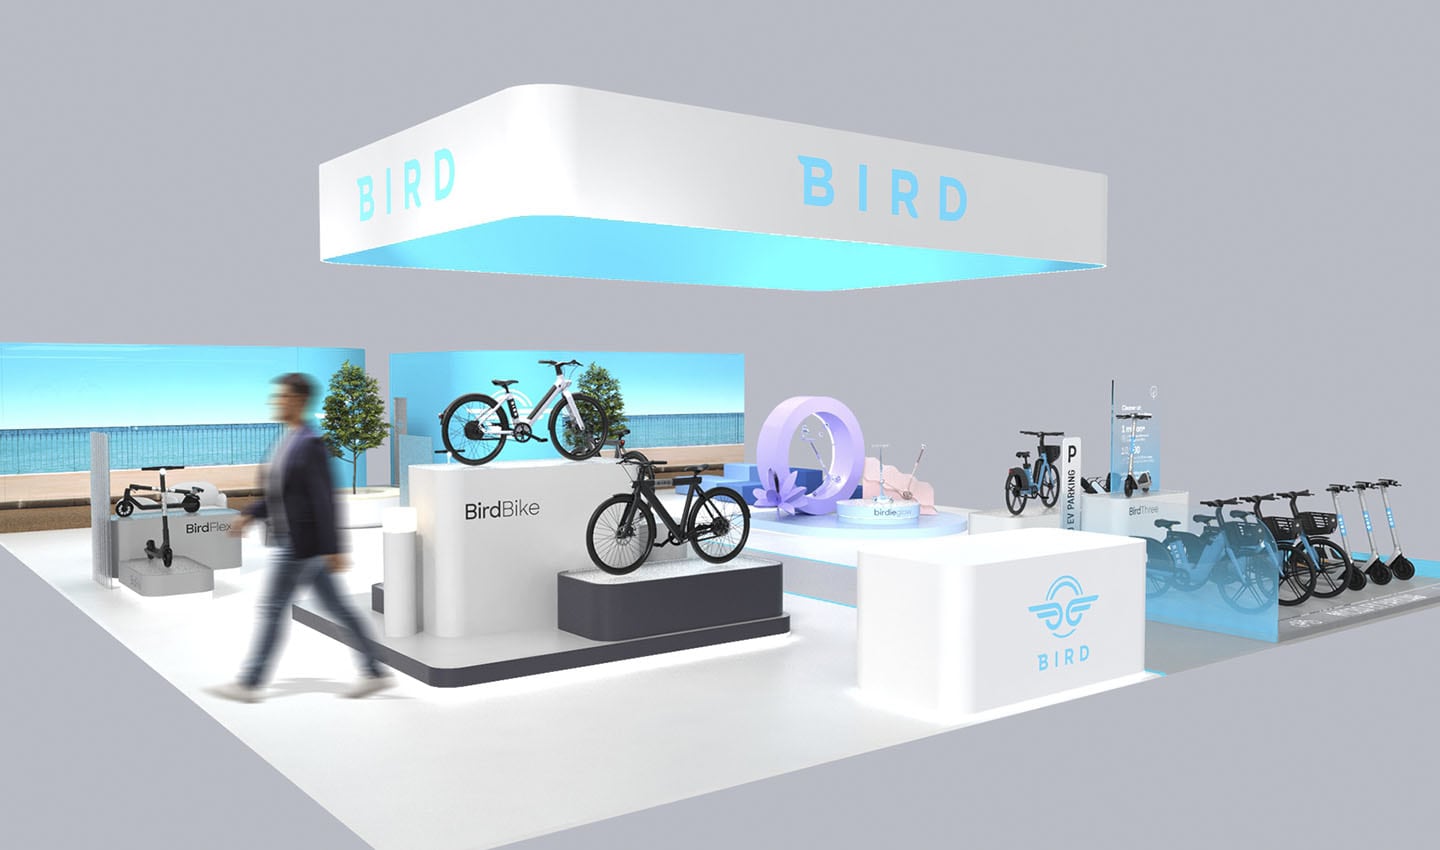 Bird’s booth at CES showed off all kinds of micromobility options, ebikes, escooters and kick scooters.